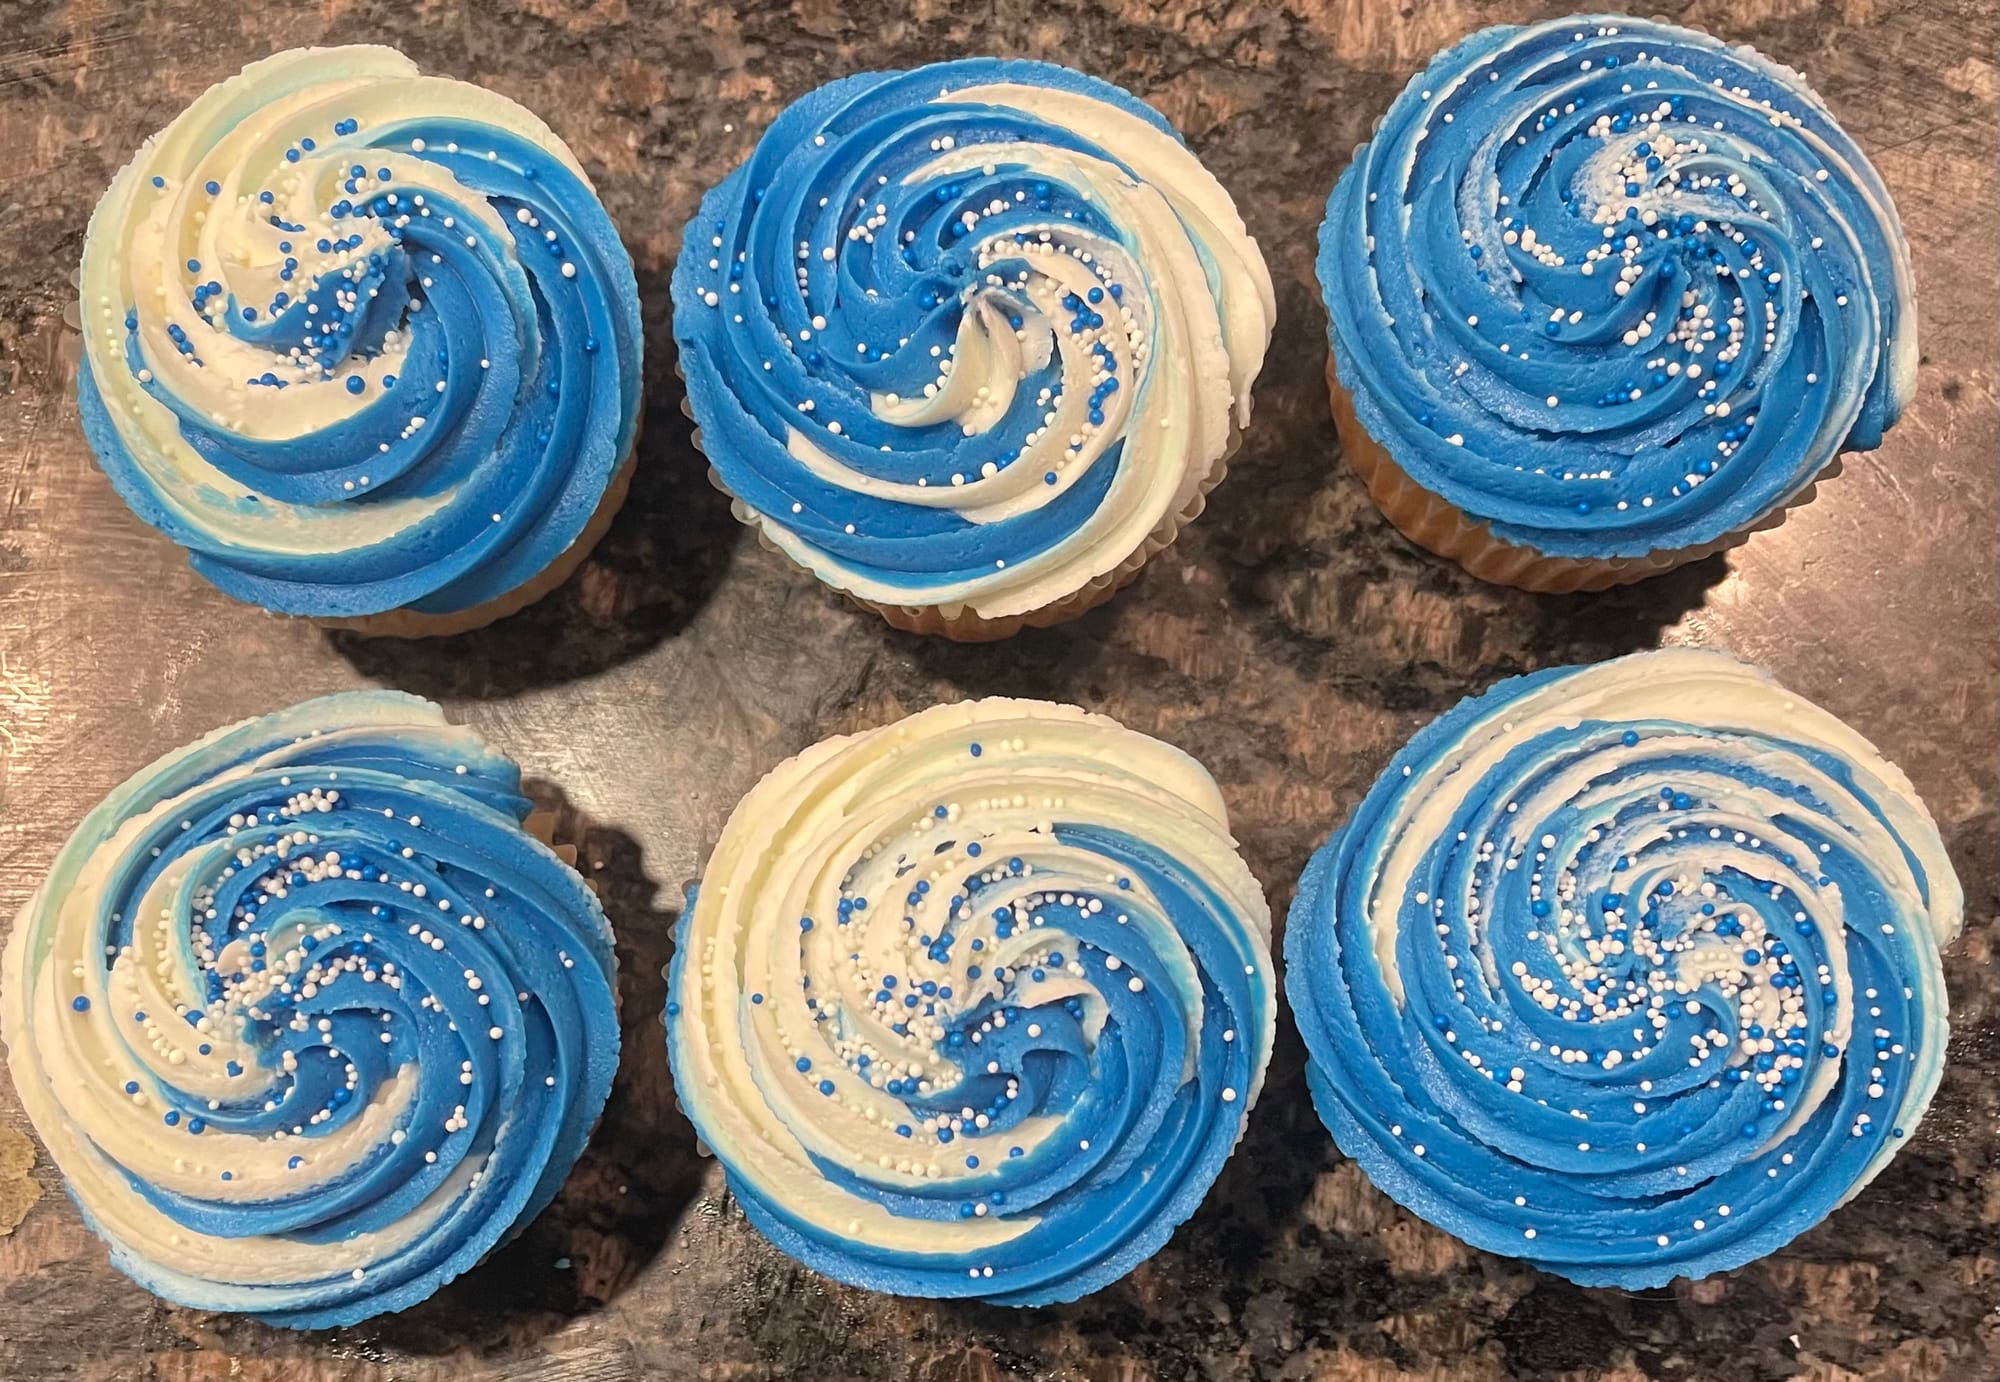 Vanilla Cupcakes With Blue And White Swirl Buttercream Frosting